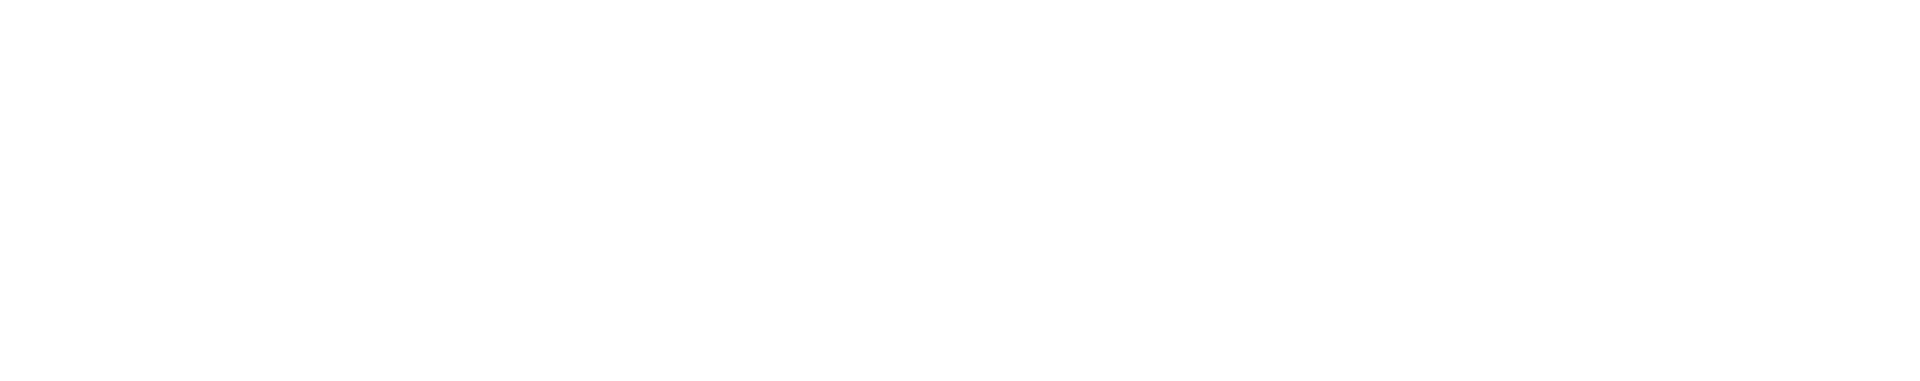 A green and white background with a wave